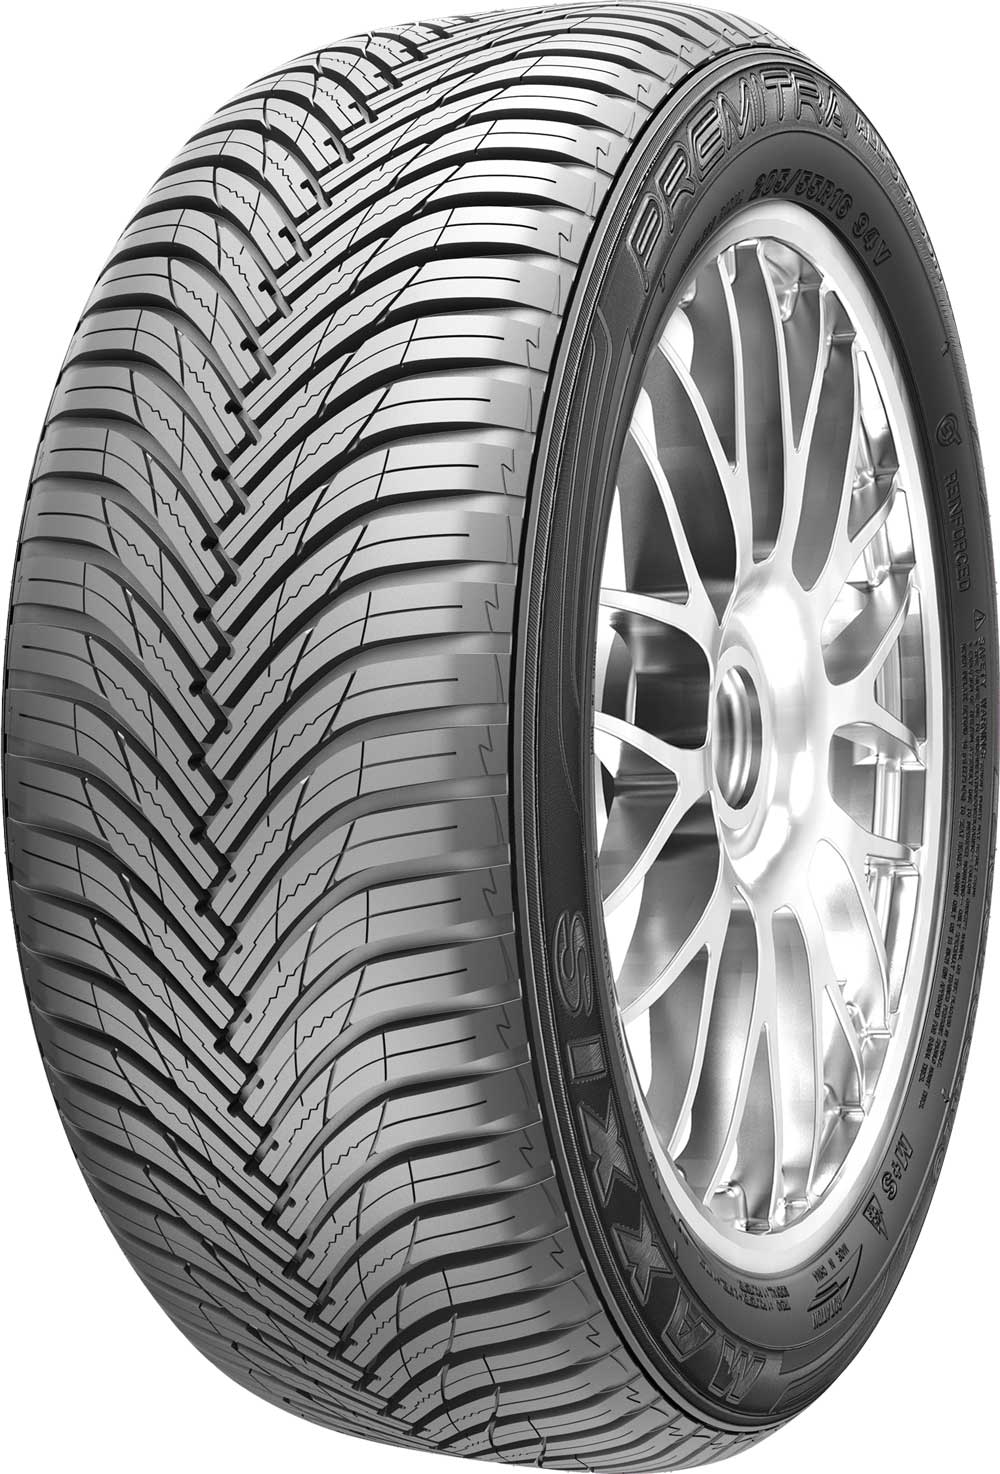 Anvelope auto MAXXIS AP3 XL 205/55 R16 94V